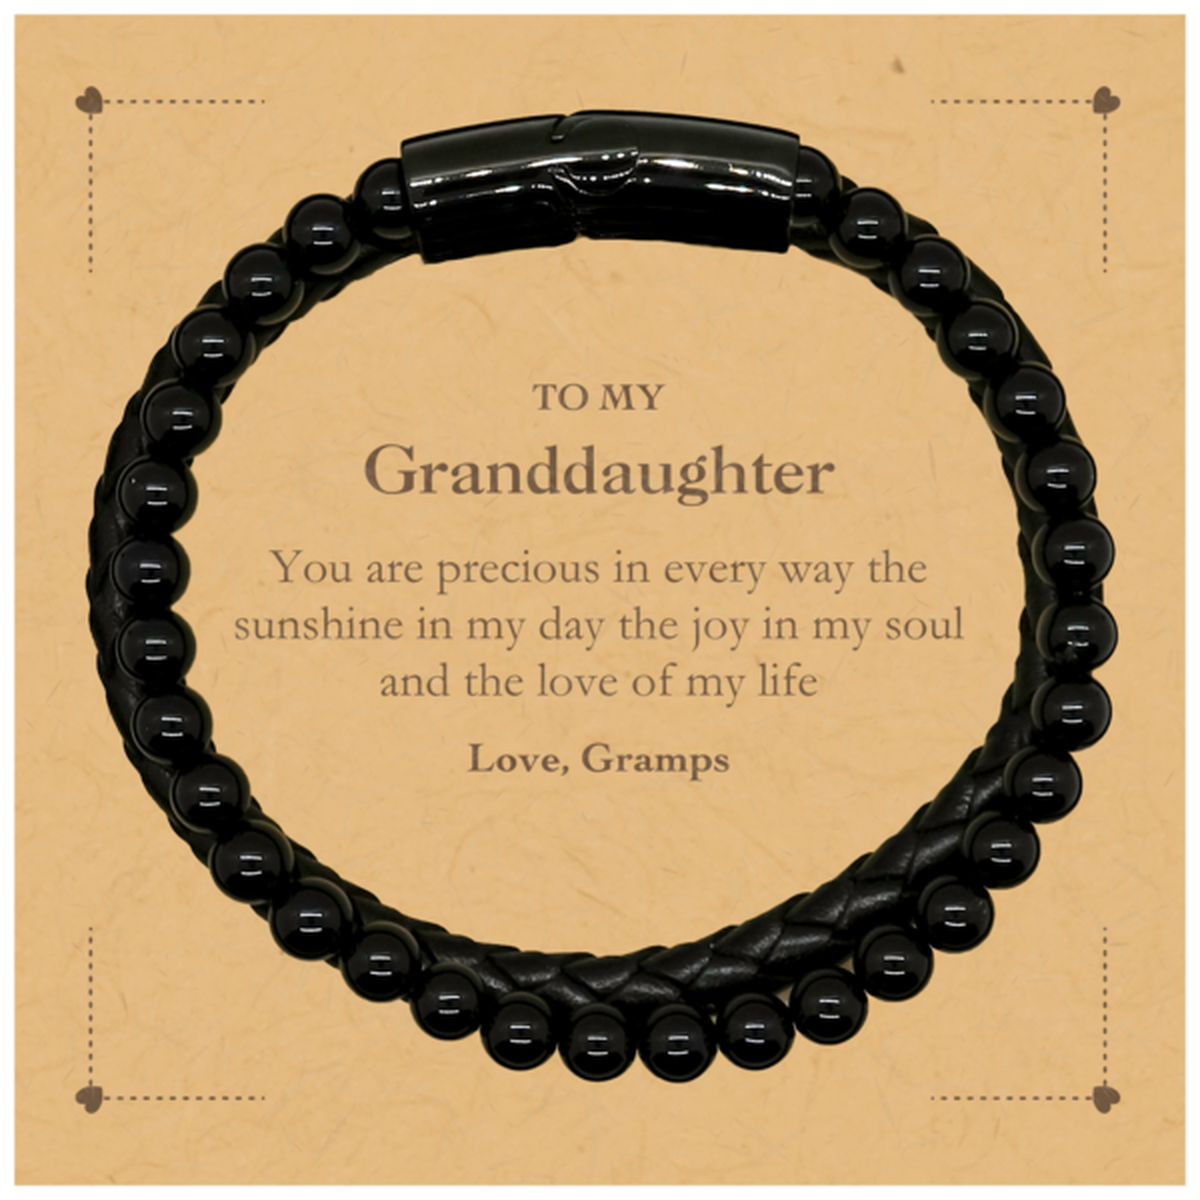 Graduation Gifts for Granddaughter Stone Leather Bracelets Present from Gramps, Christmas Granddaughter Birthday Gifts Granddaughter You are precious in every way the sunshine in my day. Love, Gramps